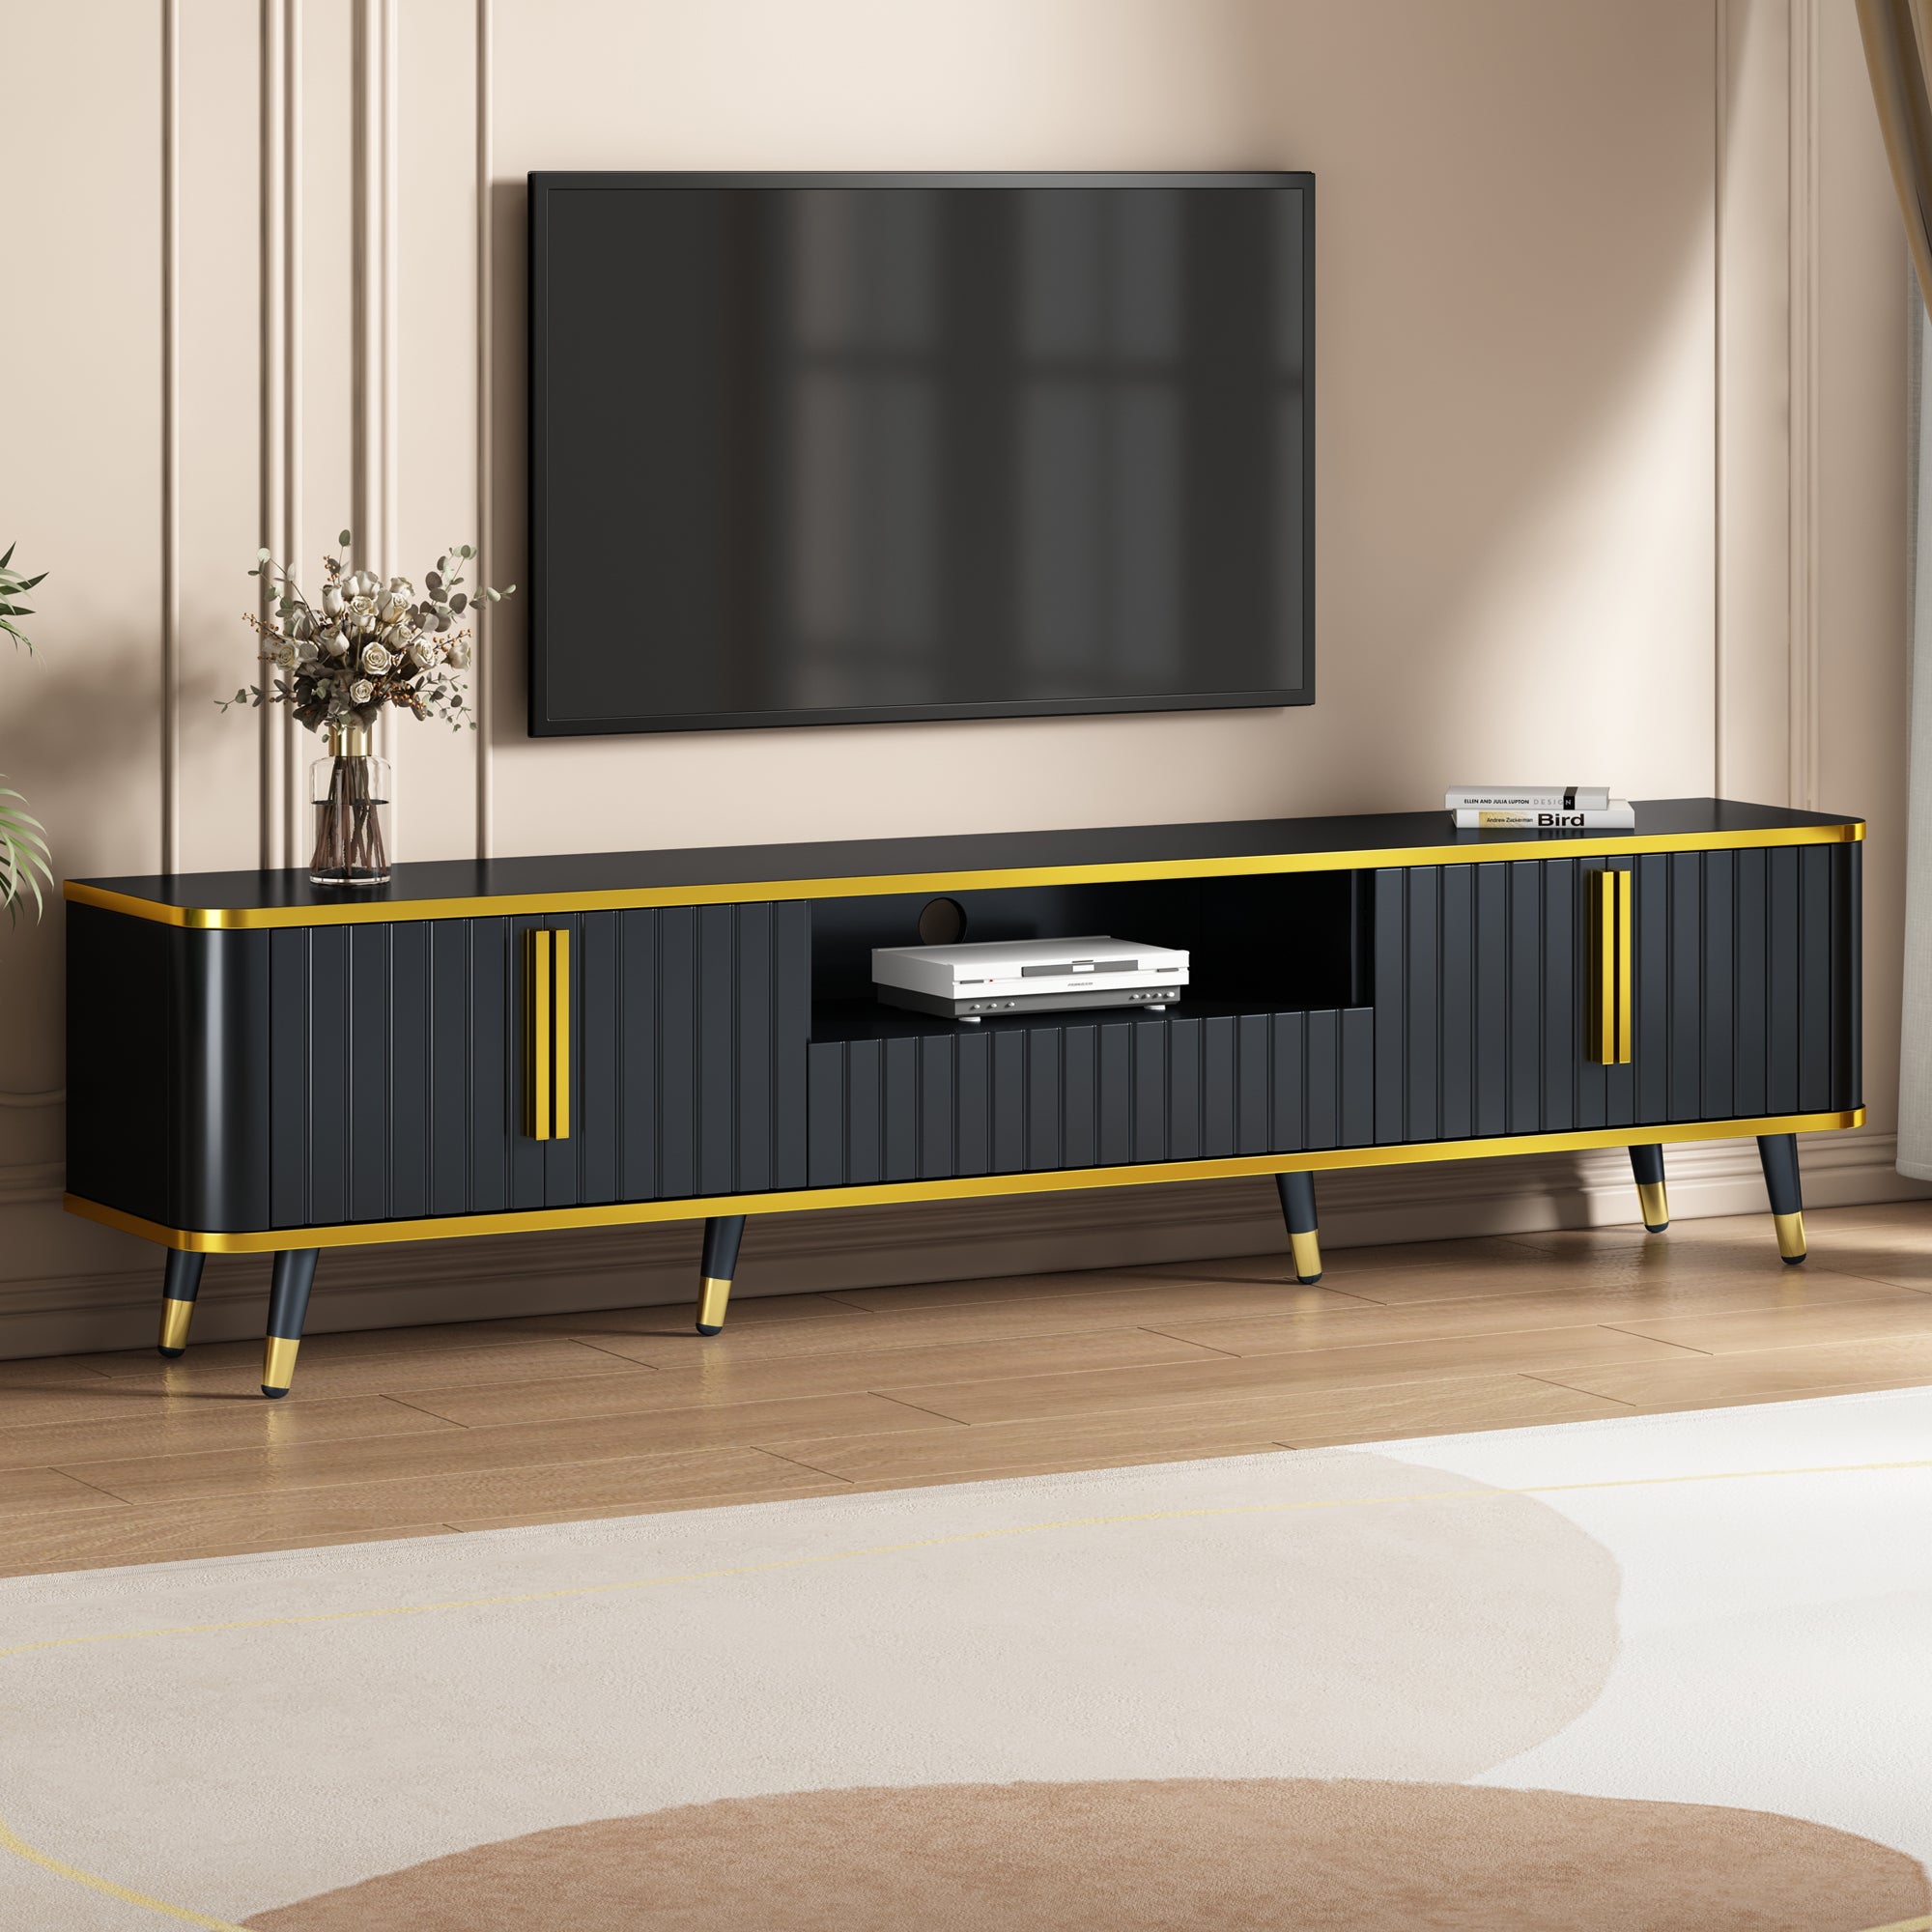 🆓🚛 Luxury Minimalism TV Stand With Open Storage Shelf for TV's Up To 85", Entertainment Center With Cabinets and Drawers, Black